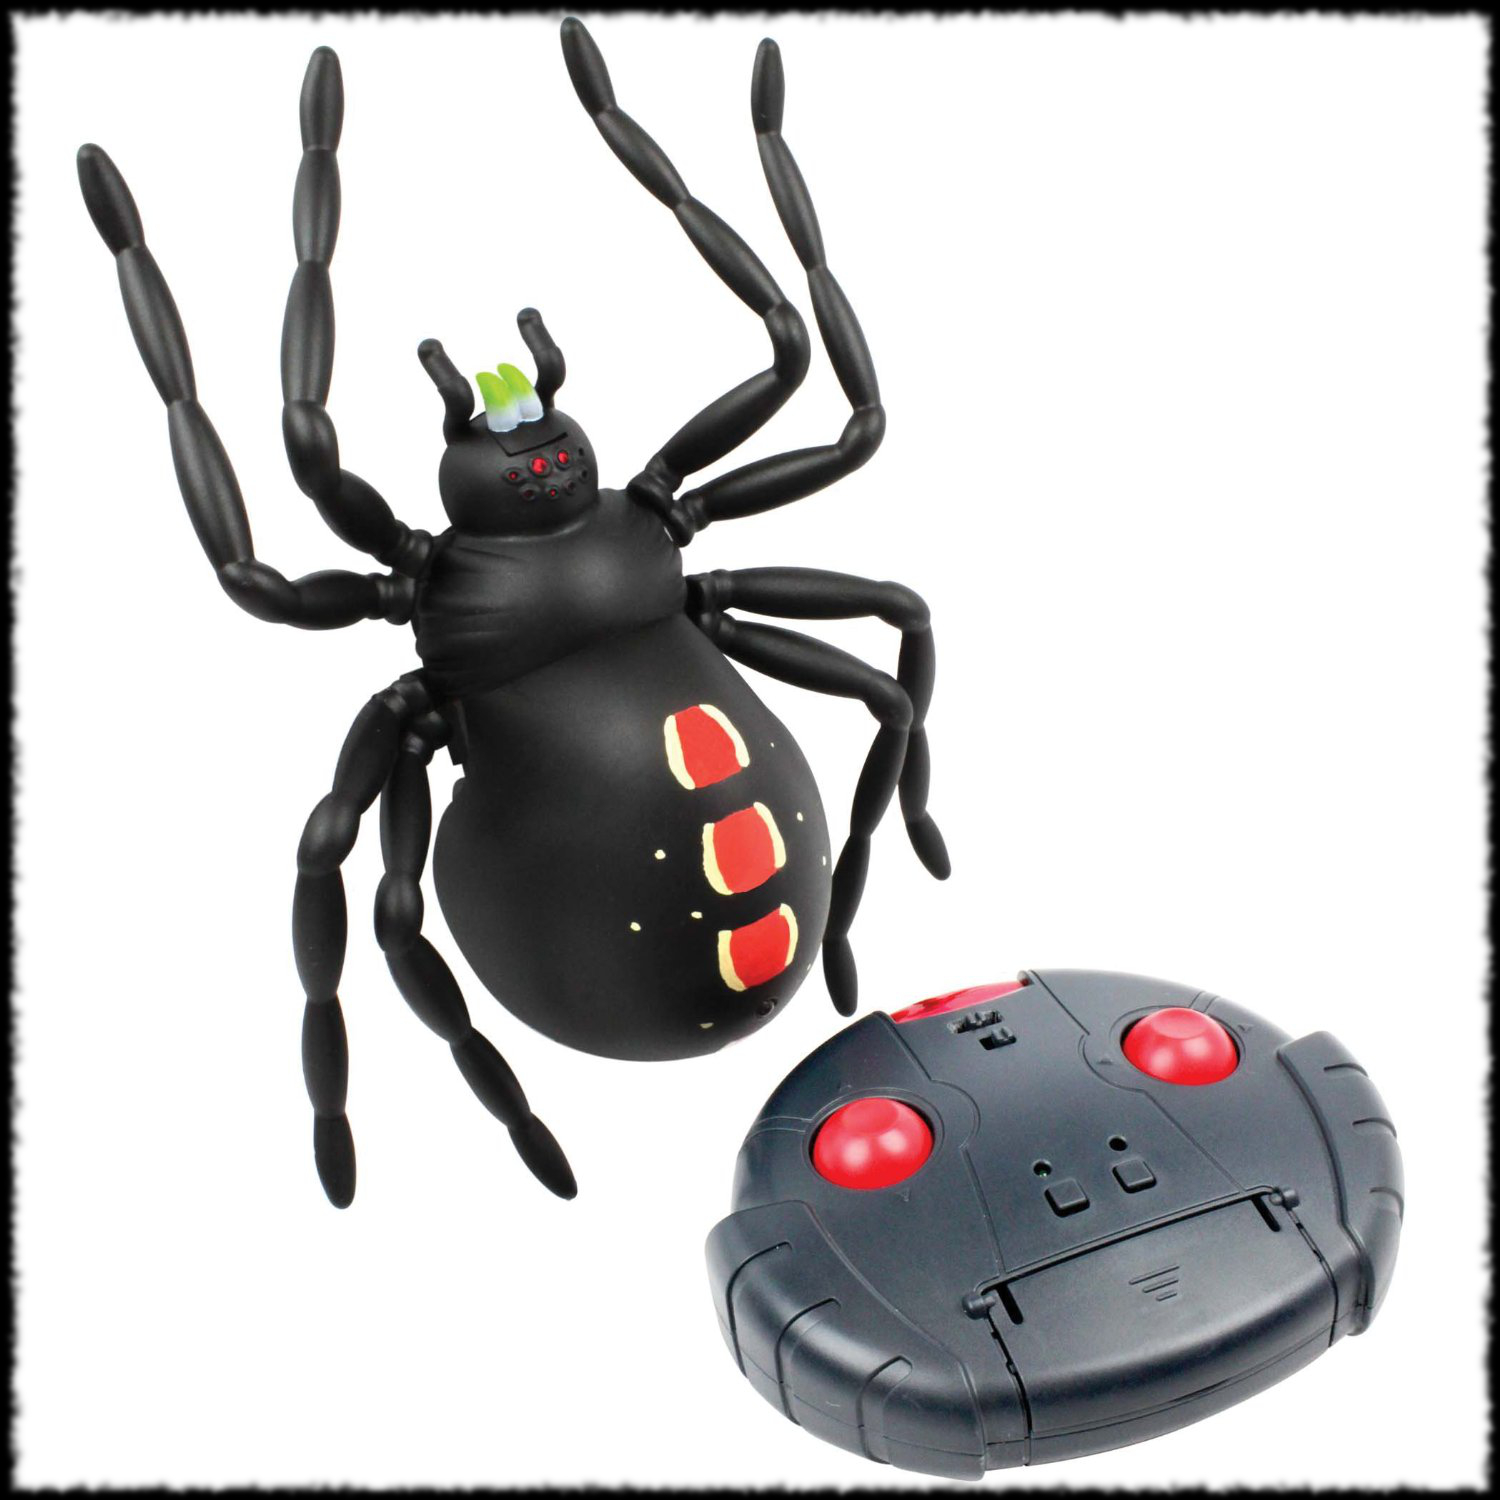 Remote controlled spider for sale Halloween trick or treat prank idea